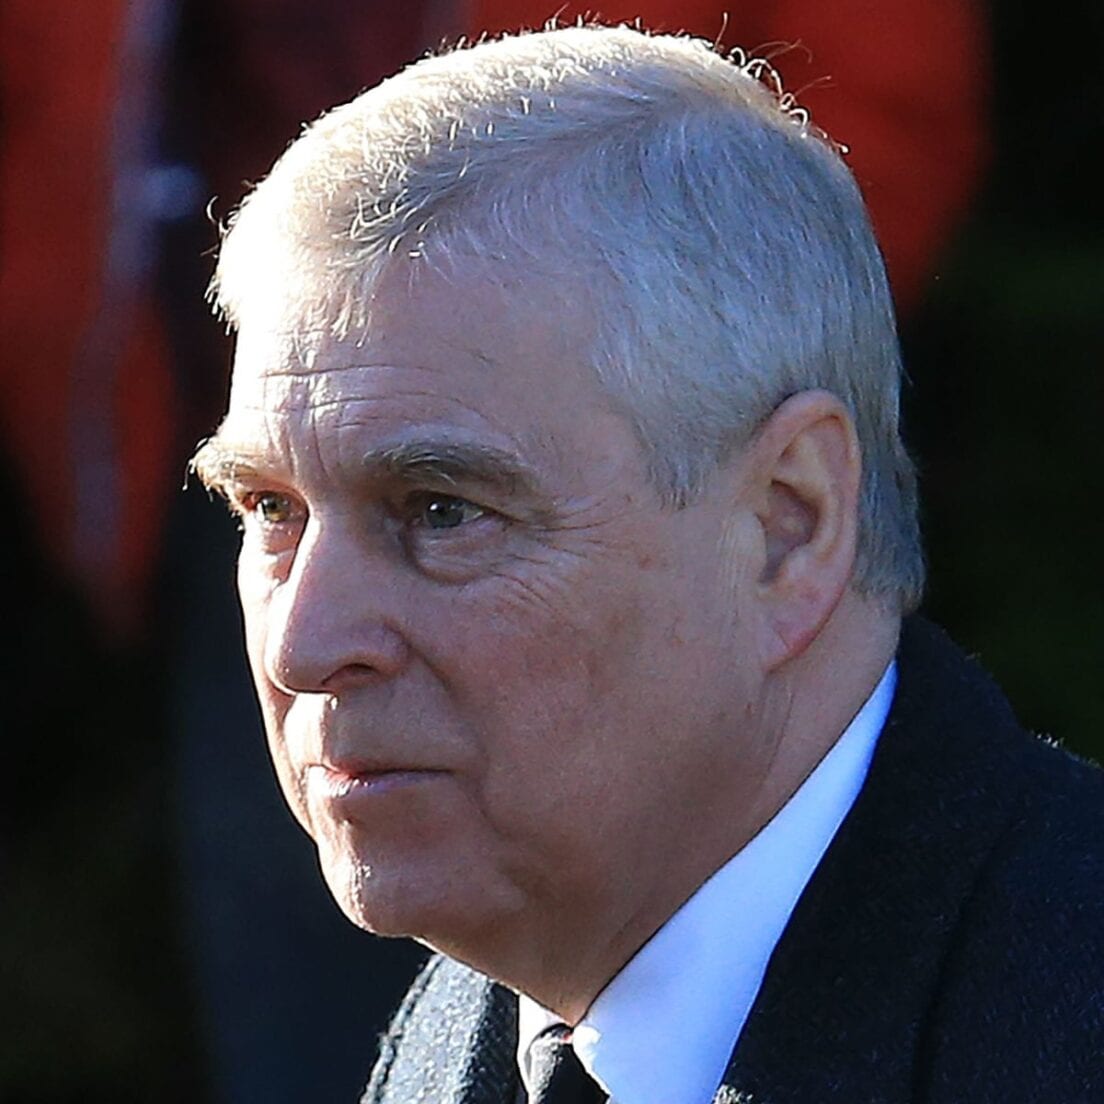 Prince Andrew Duke Of York Has The Queen Fired Him